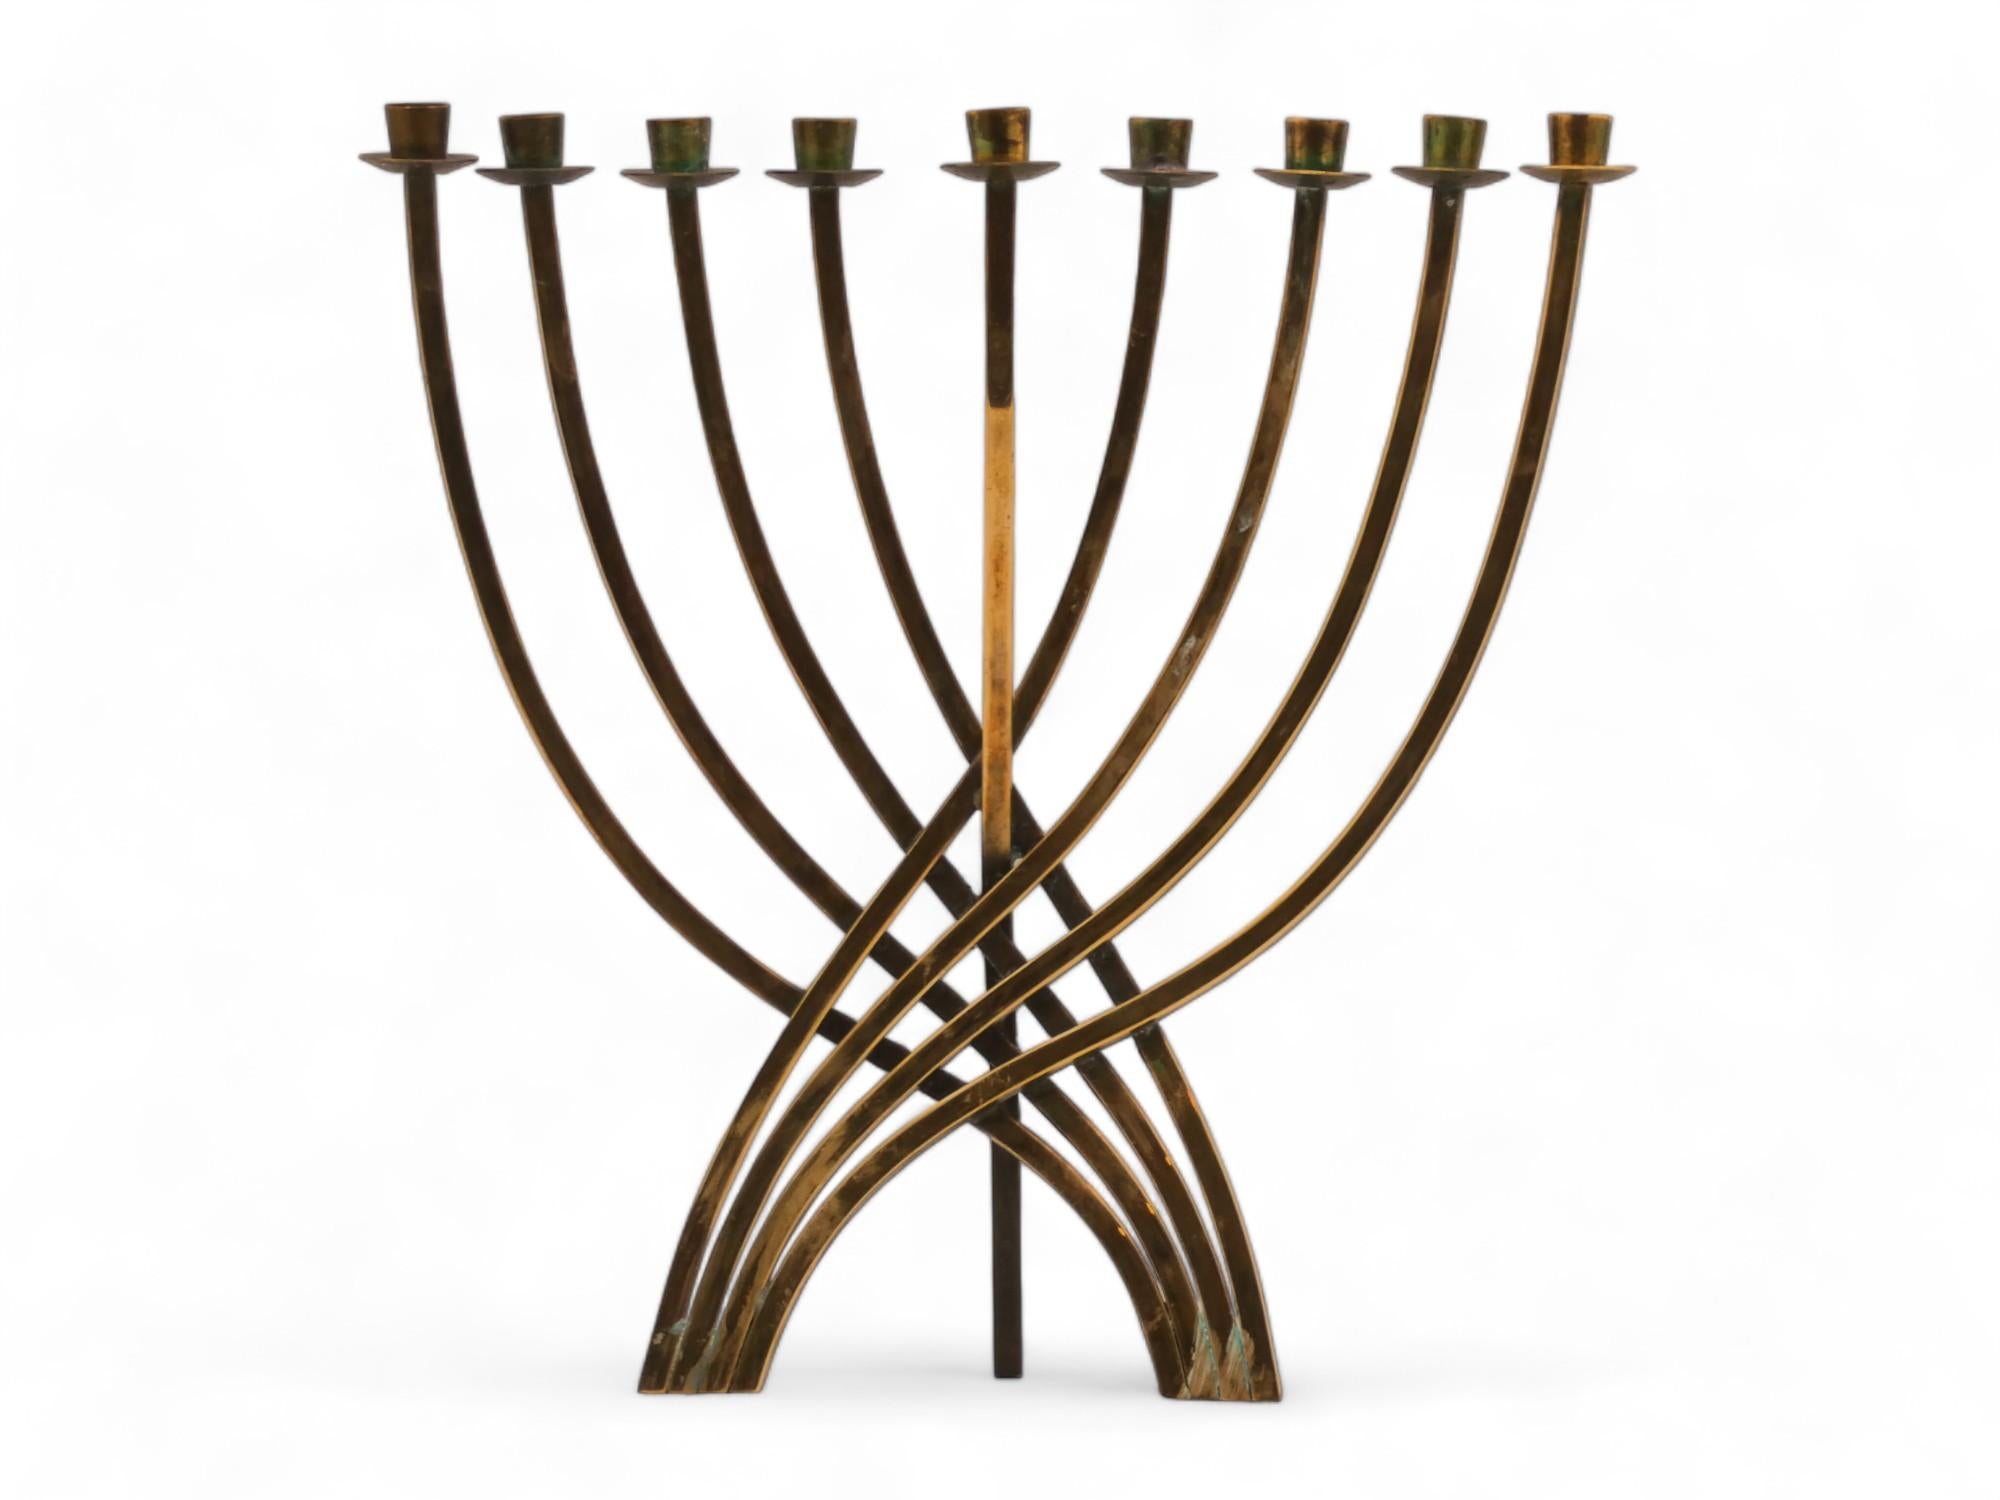 Brass Menorah by Ludwig Yehuda Wolpert is a reproduction of a minimalist branch menorah with a Bauhaus styling designed by Ludwig Yehuda Wolpert.

Menorah is made up of nine long squared brass stems crisscrossing at the center and curving their way